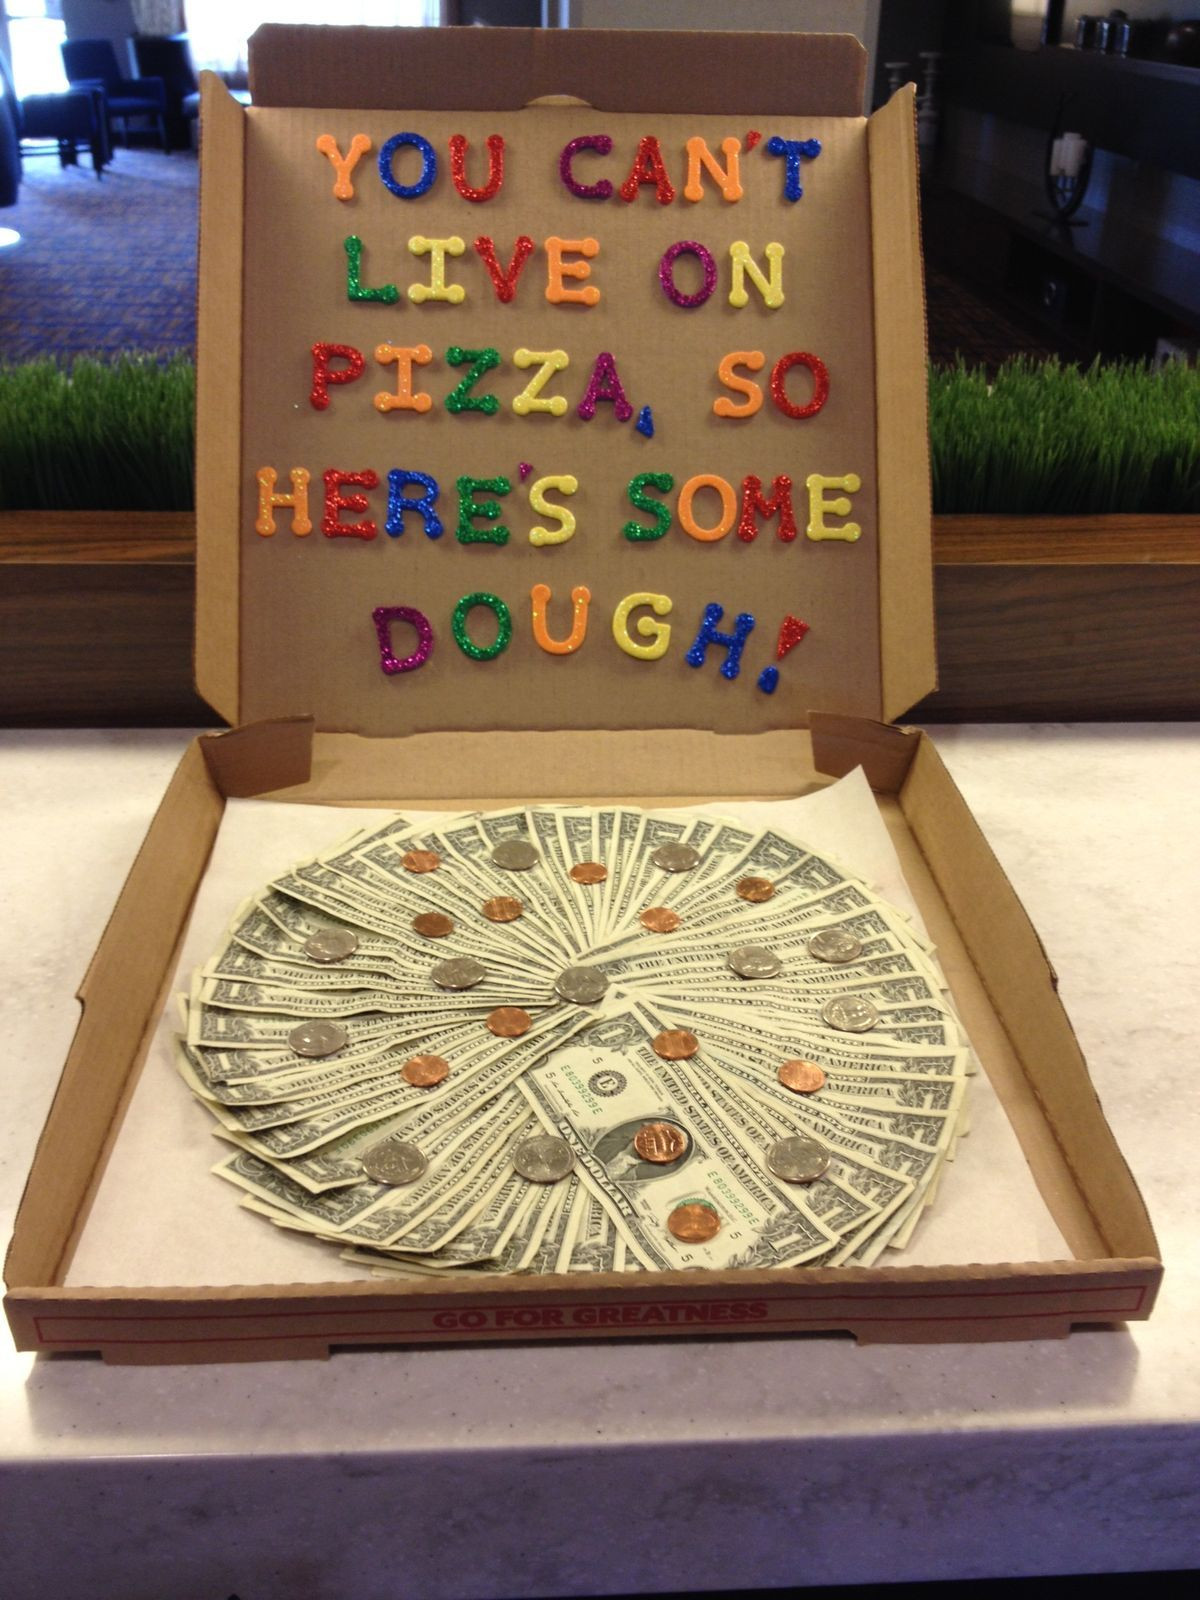 High School Graduation Gift Ideas For Son
 You can t live on pizza so here s some dough fun way